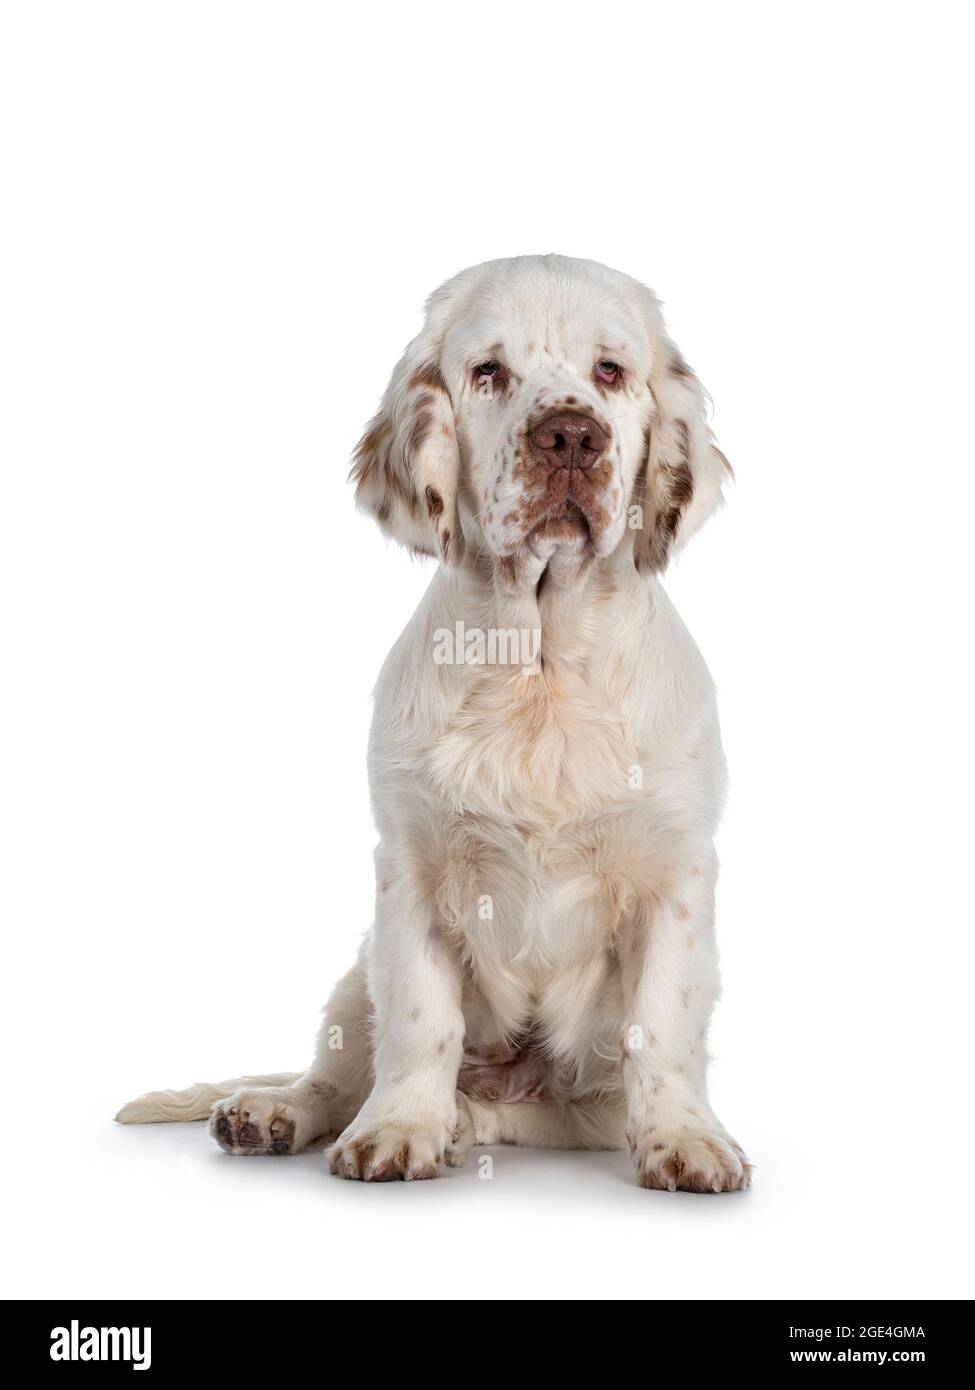 Cute Clumber Spaniel dog pup, sitting up facing front. Looking towards camera with the typical droopy eyes. Isolated on a white background. Stock Photo